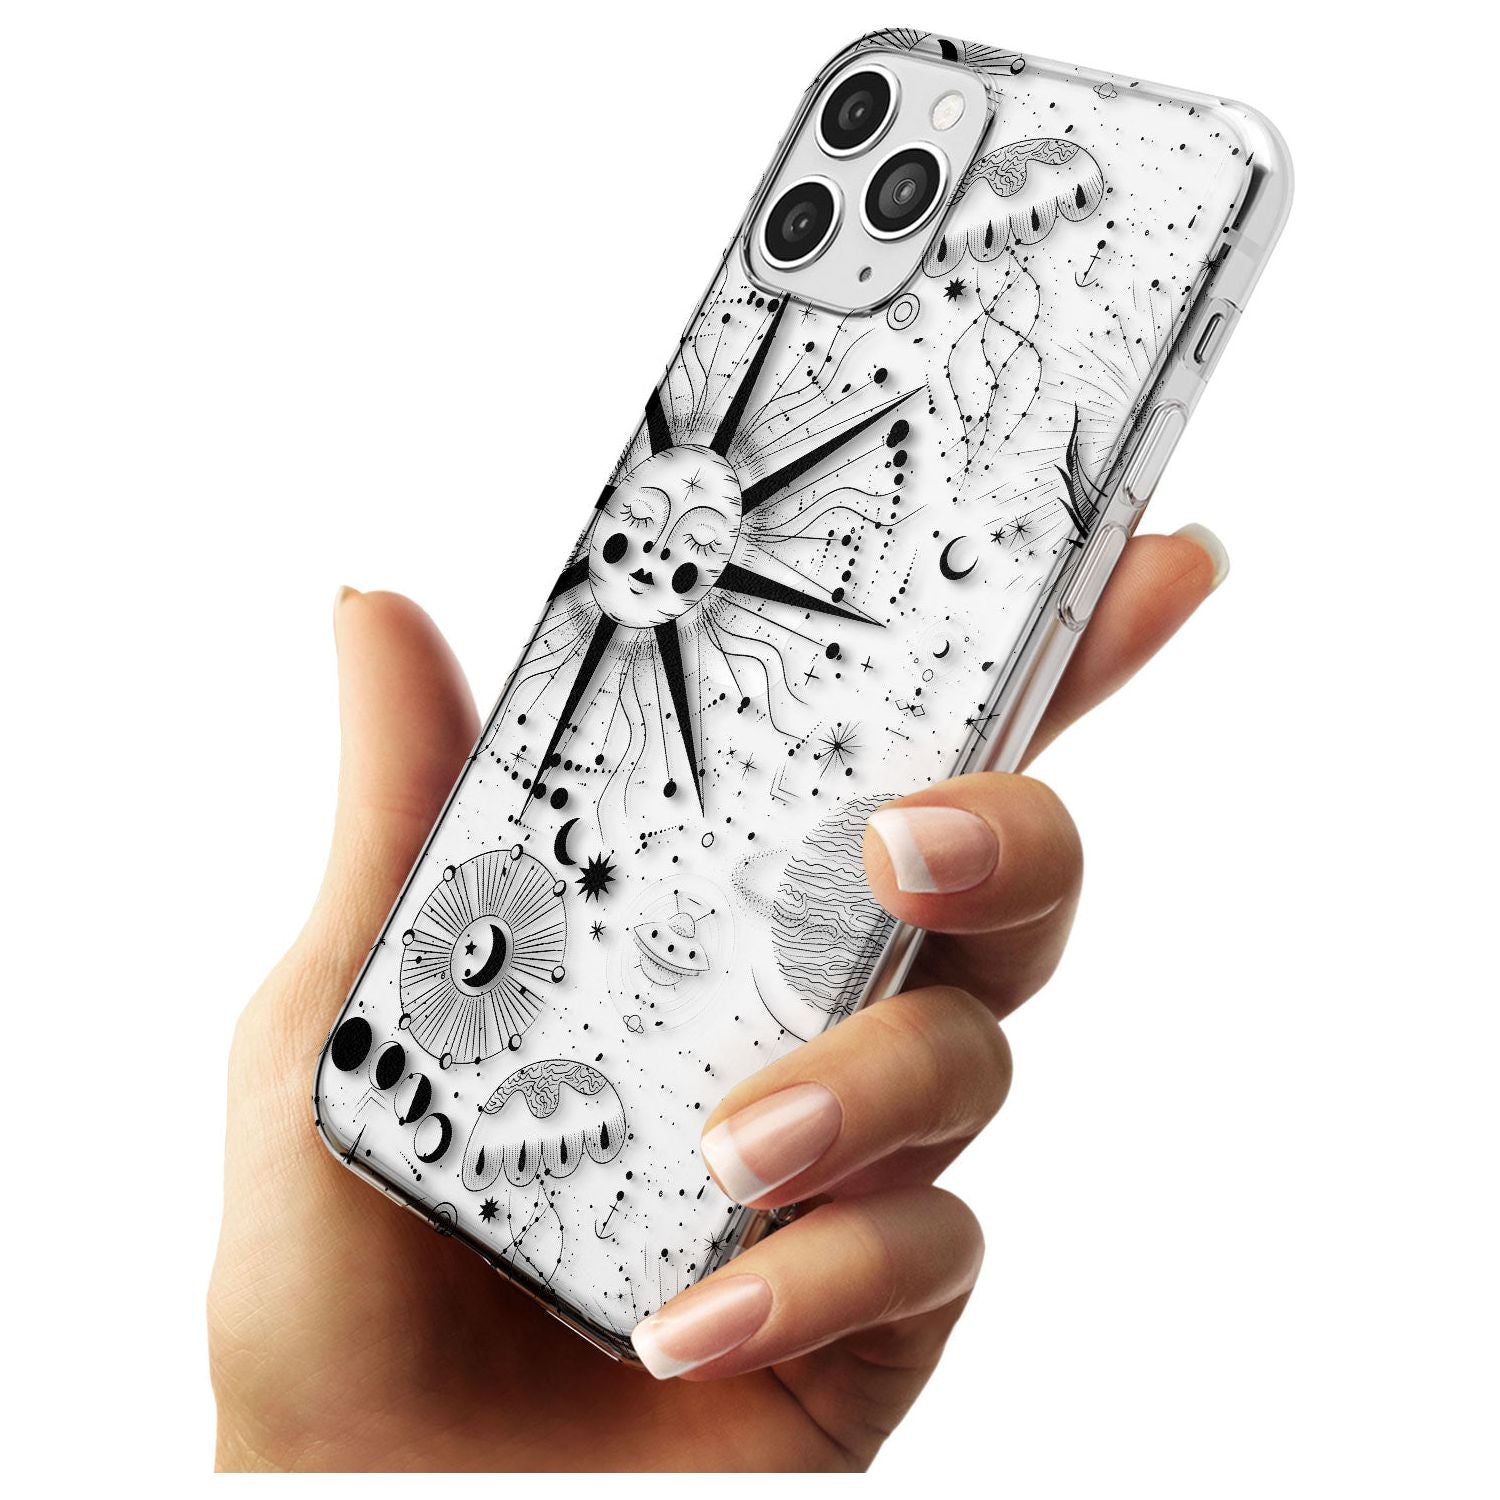 Large Sun Vintage Astrological Slim TPU Phone Case for iPhone 11 Pro Max